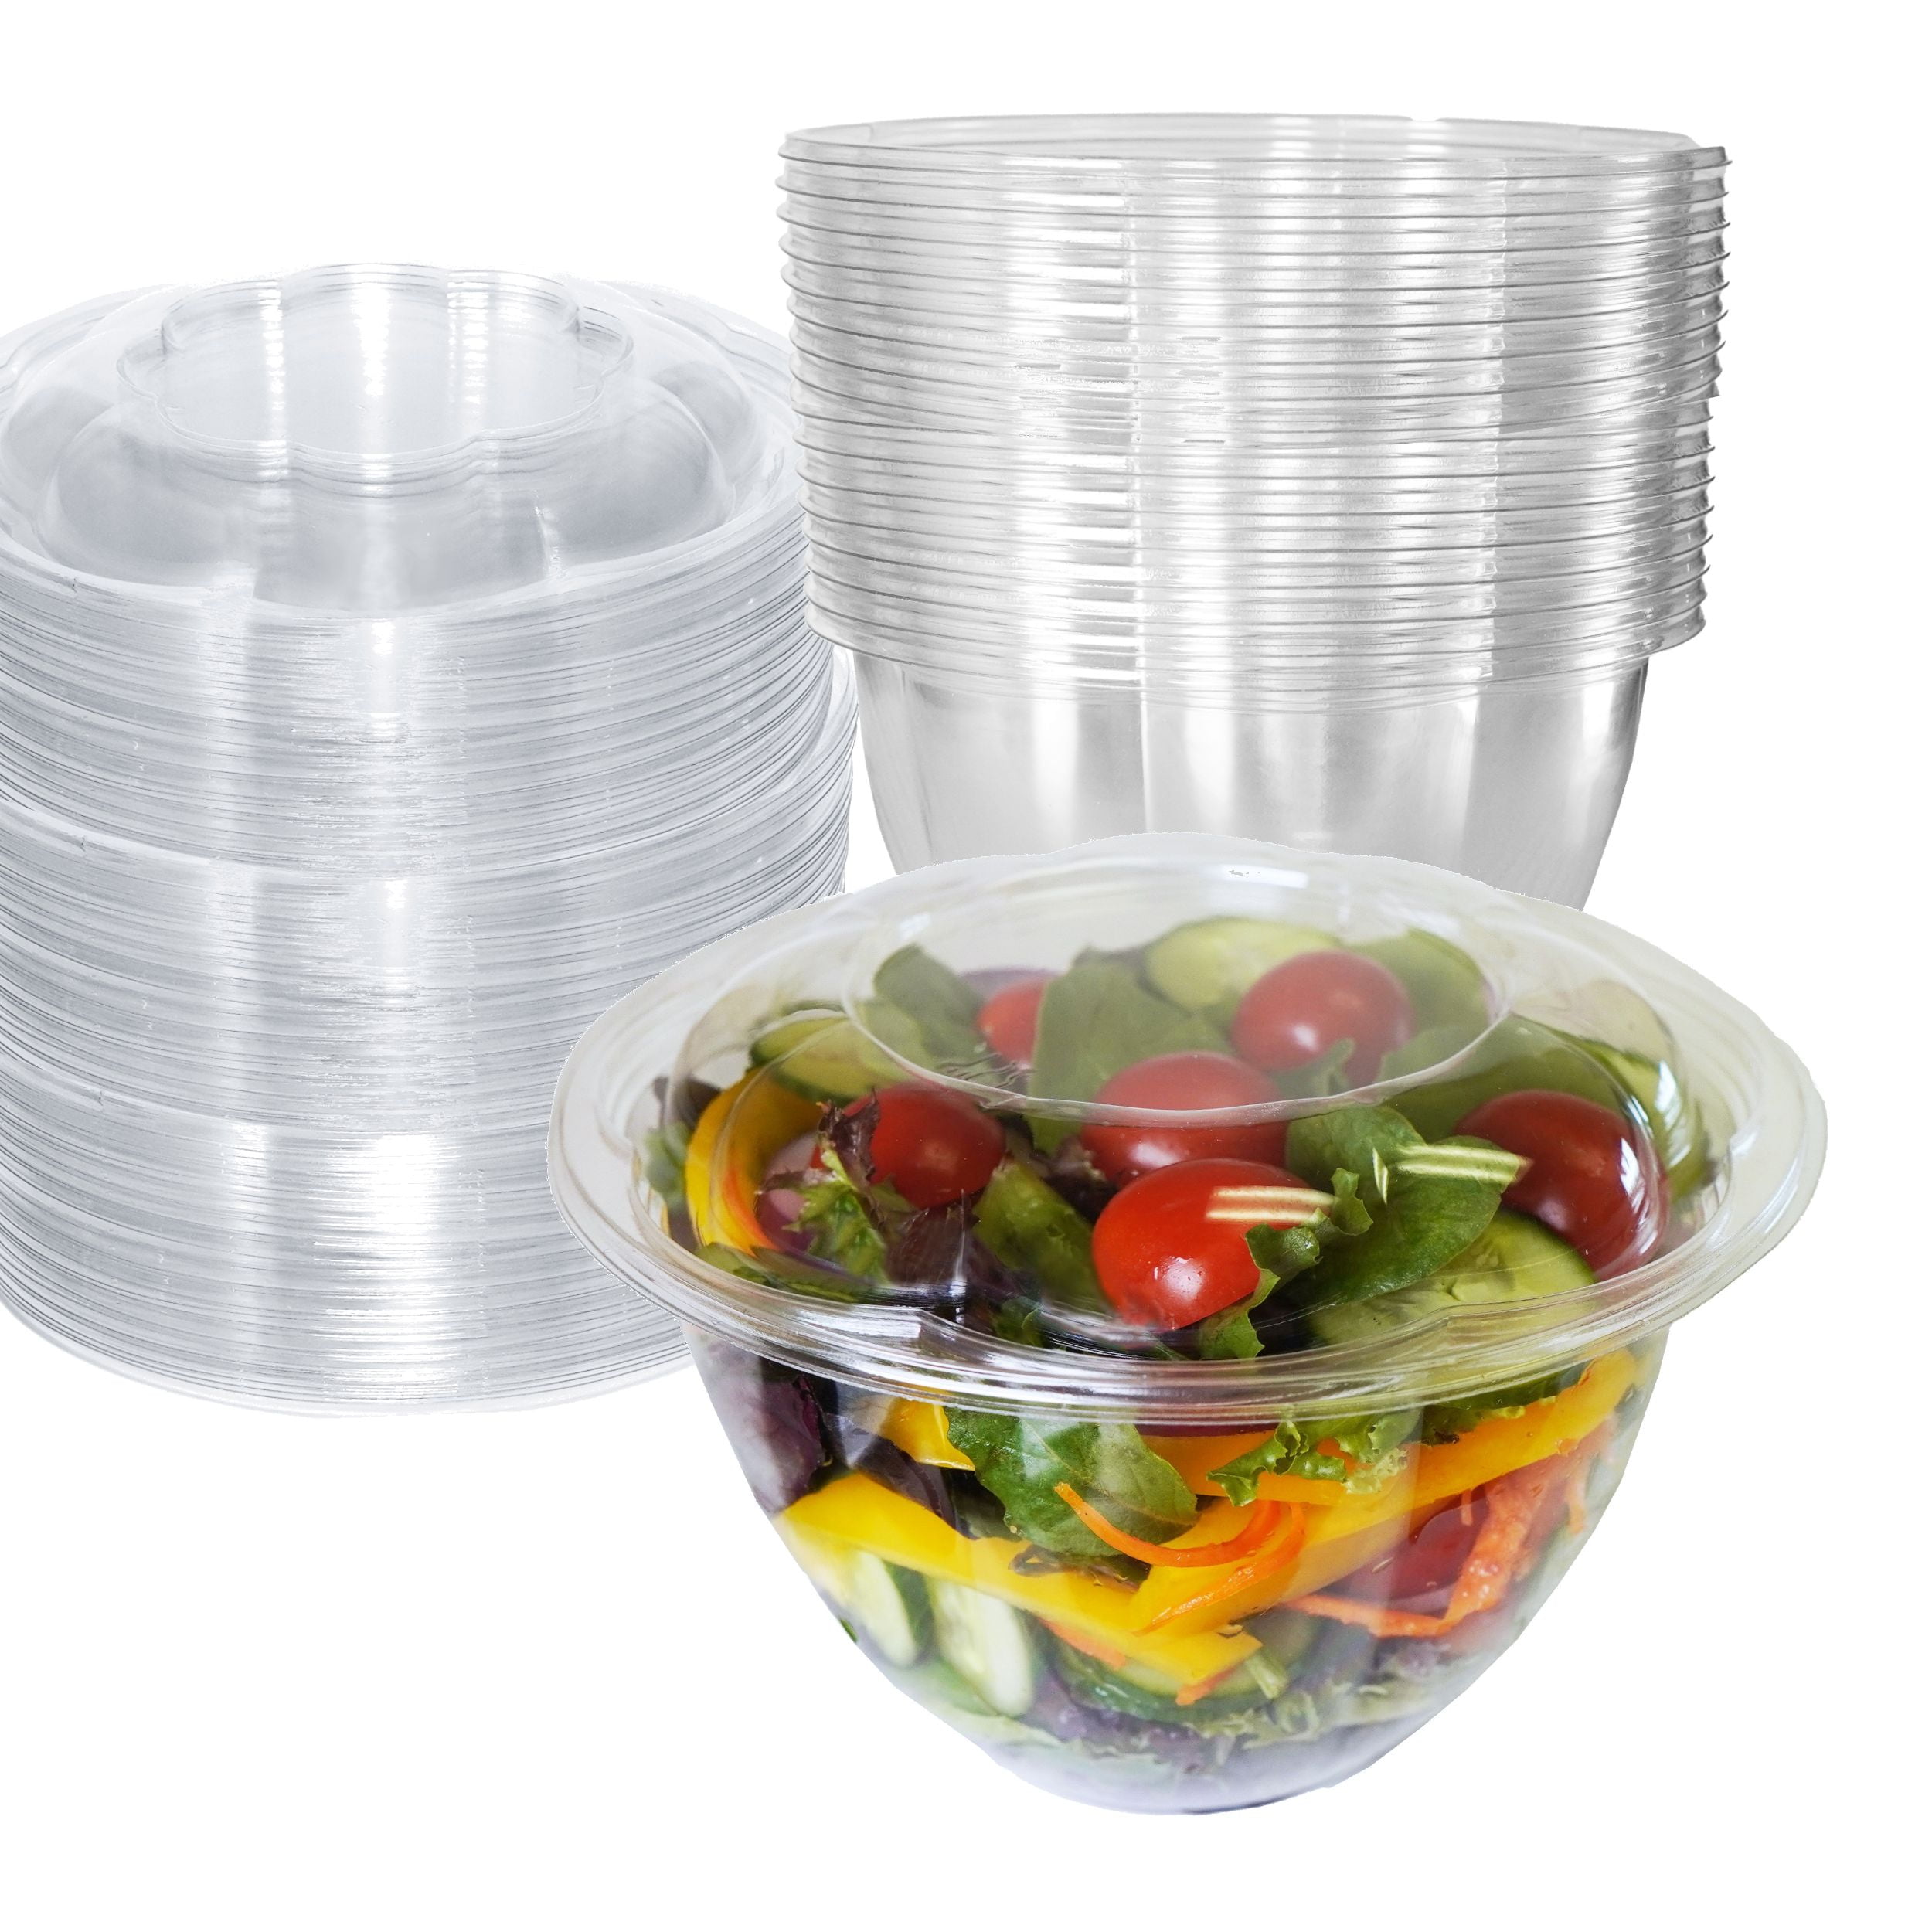 300 PACK] 48oz Clear Disposable Salad Bowls with Lids - Clear Plastic  Disposable Salad Containers for Lunch To-Go, Salads, Fruits, Airtight, Leak  Proof, Fresh, Meal Prep